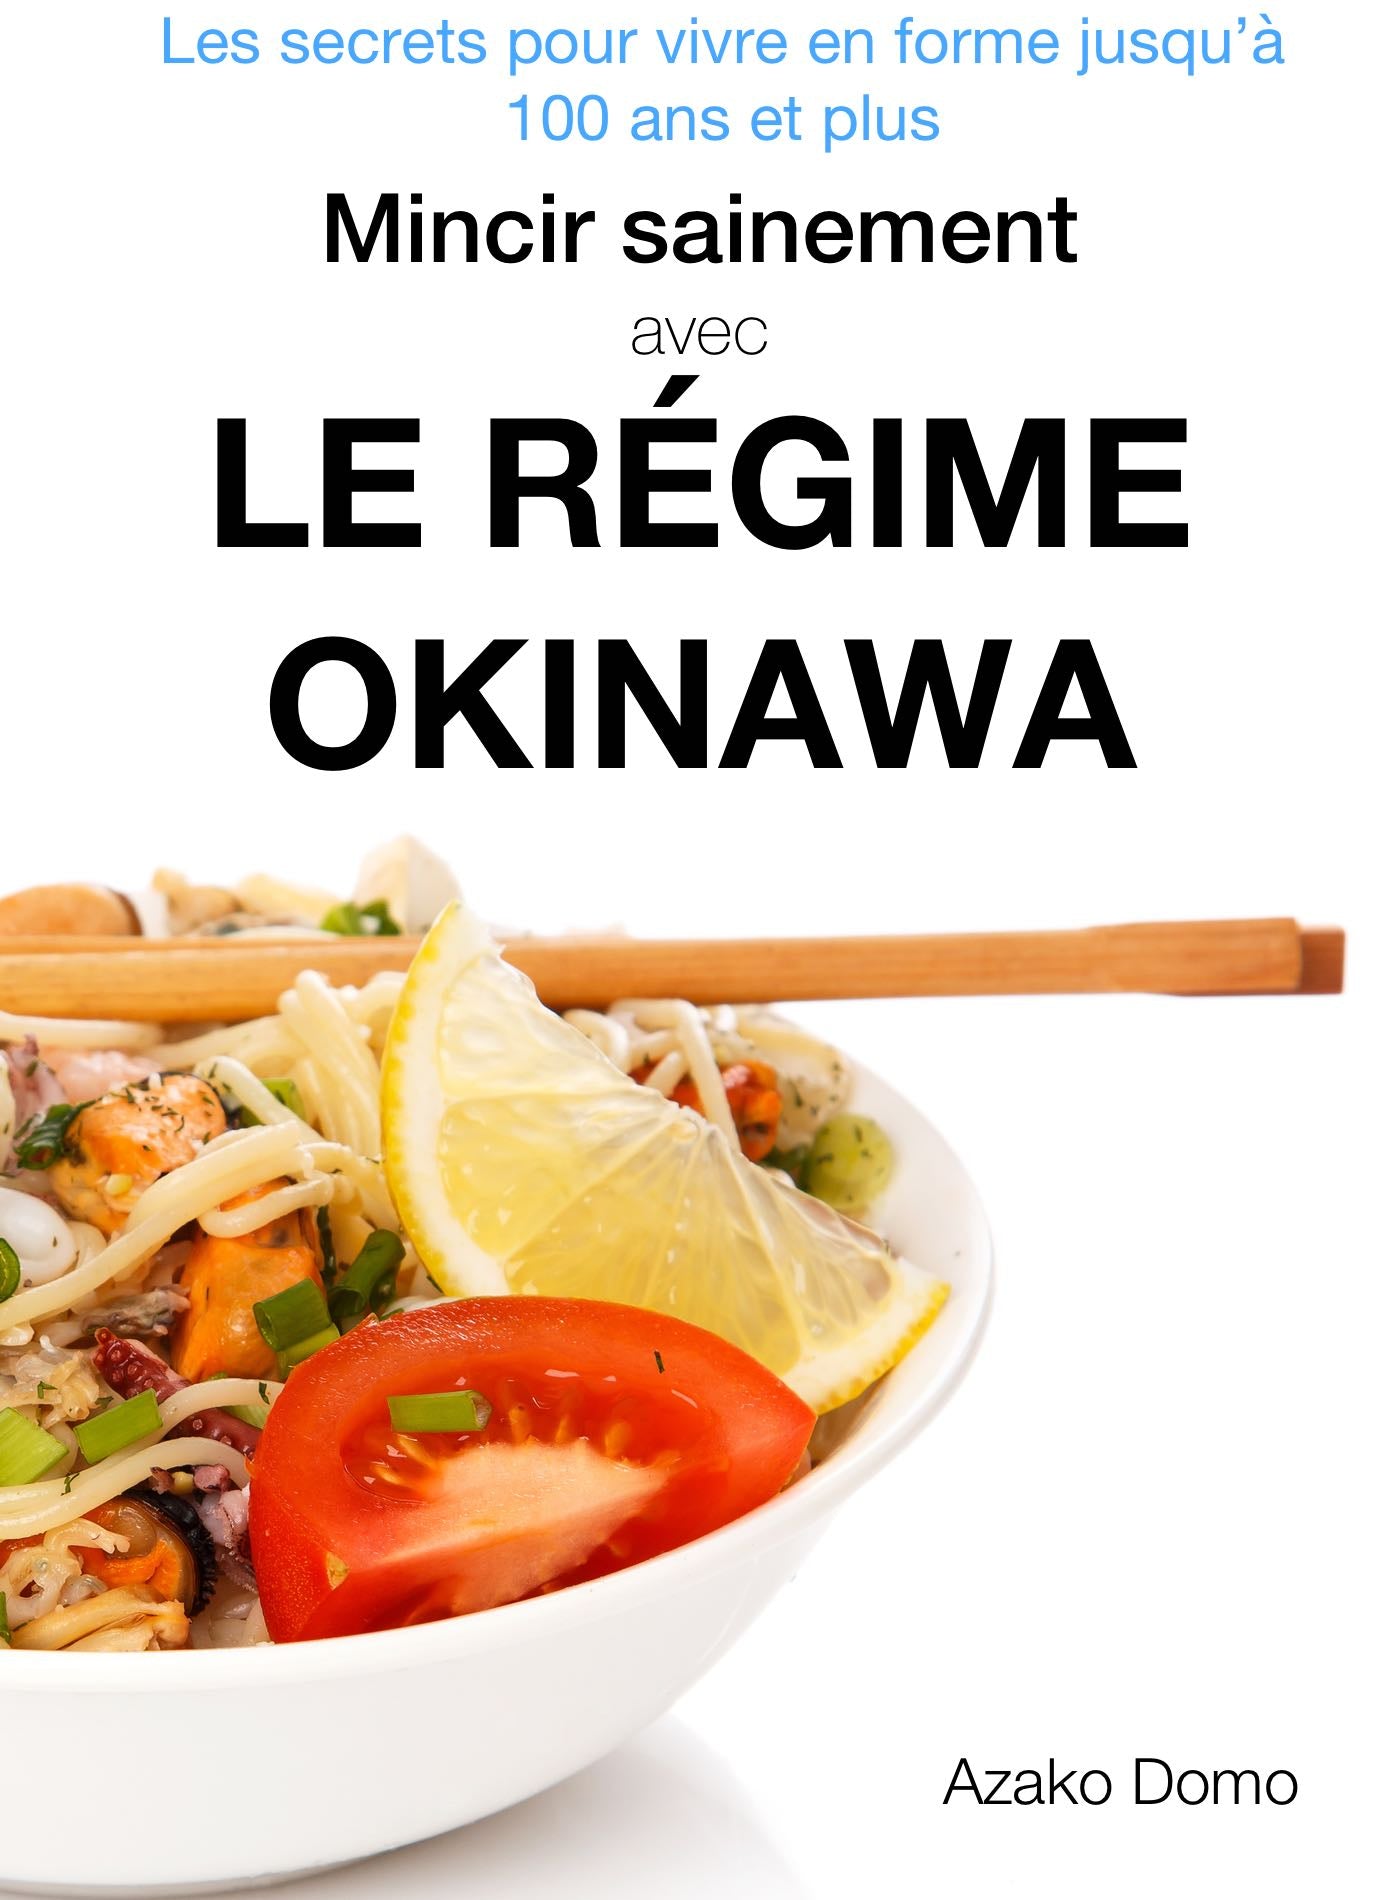 Healthy weight loss with the Okinawa diet - ebook